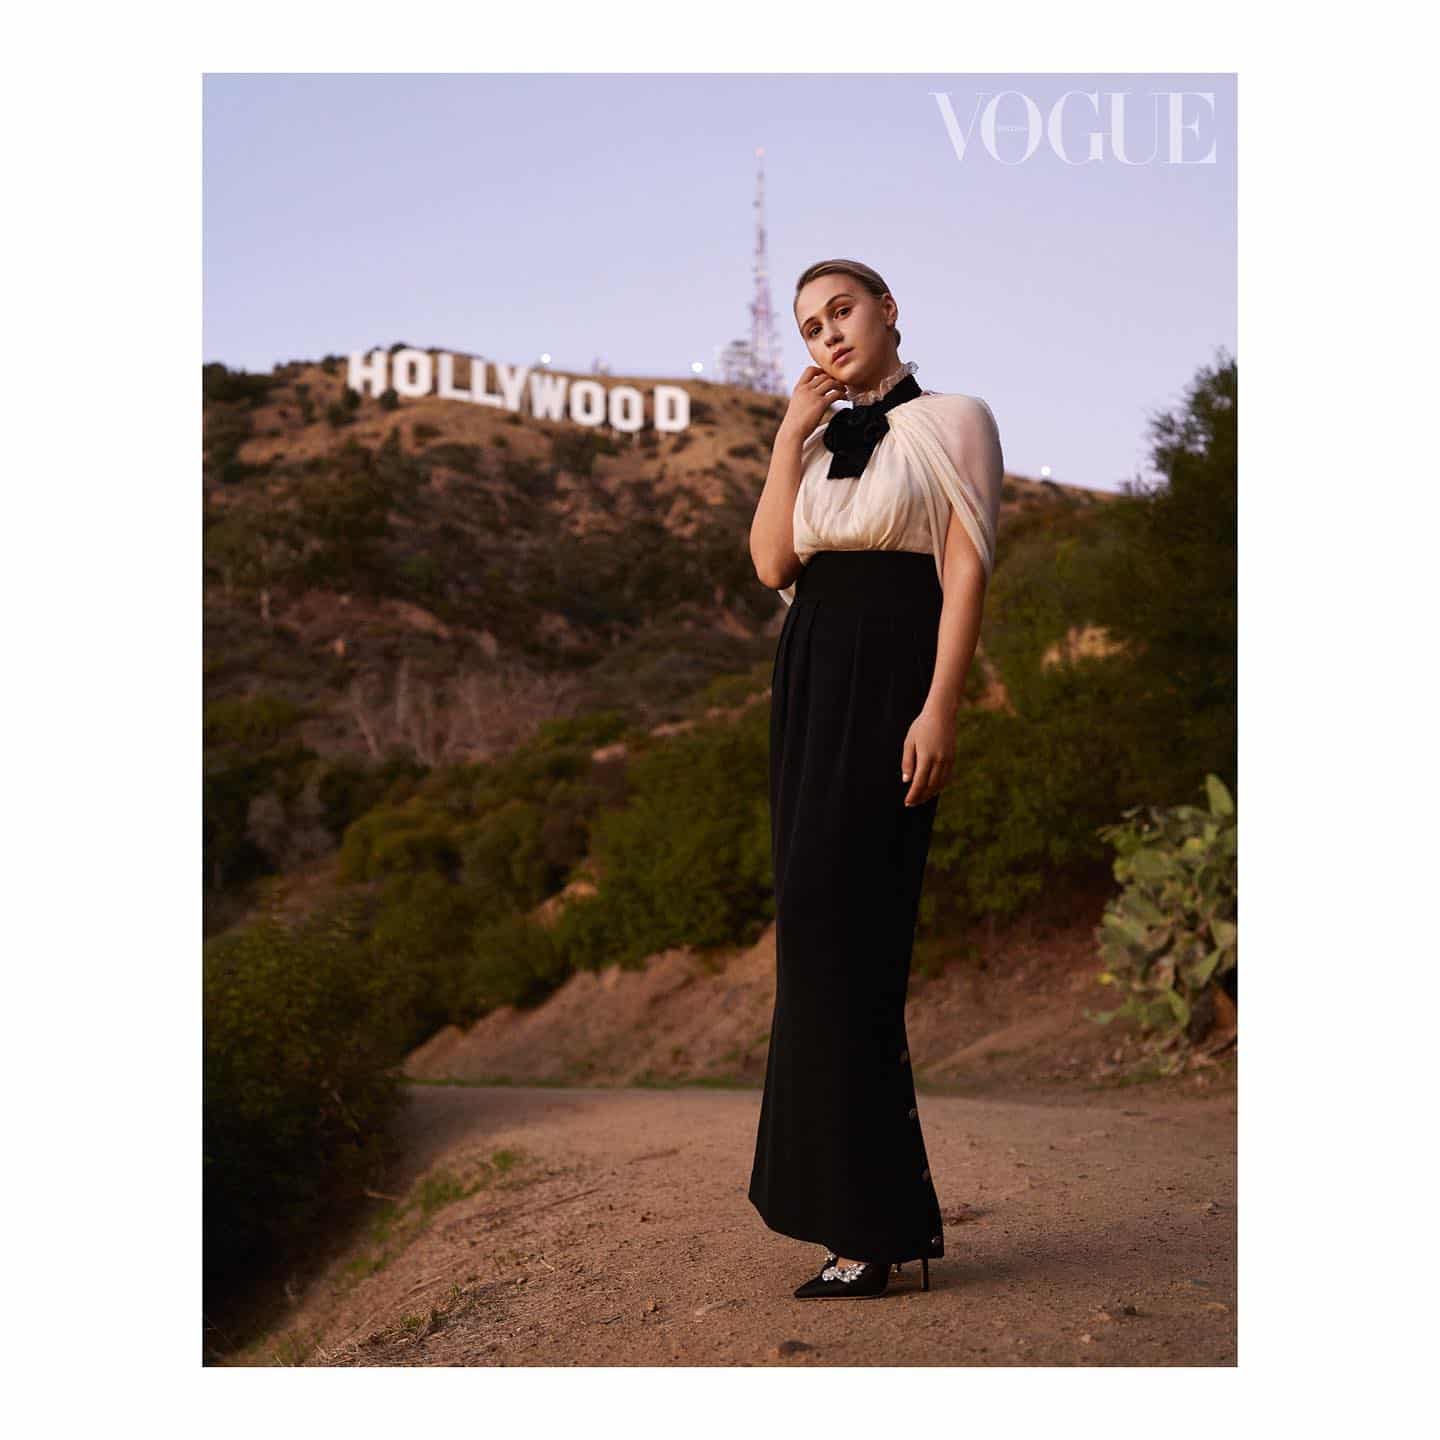 @bafta nominee @mariabakalovaofficial photographed by @gregwilliamsphotography for @britishvogue for their Hollywood Portfolio April Issue  
.
.
.
@chanelofficial @janetmandell @jimmychoo @denagia @peterluxhair @hollysilius @ebellevents @jilldemling @gileshattersley 
.
.